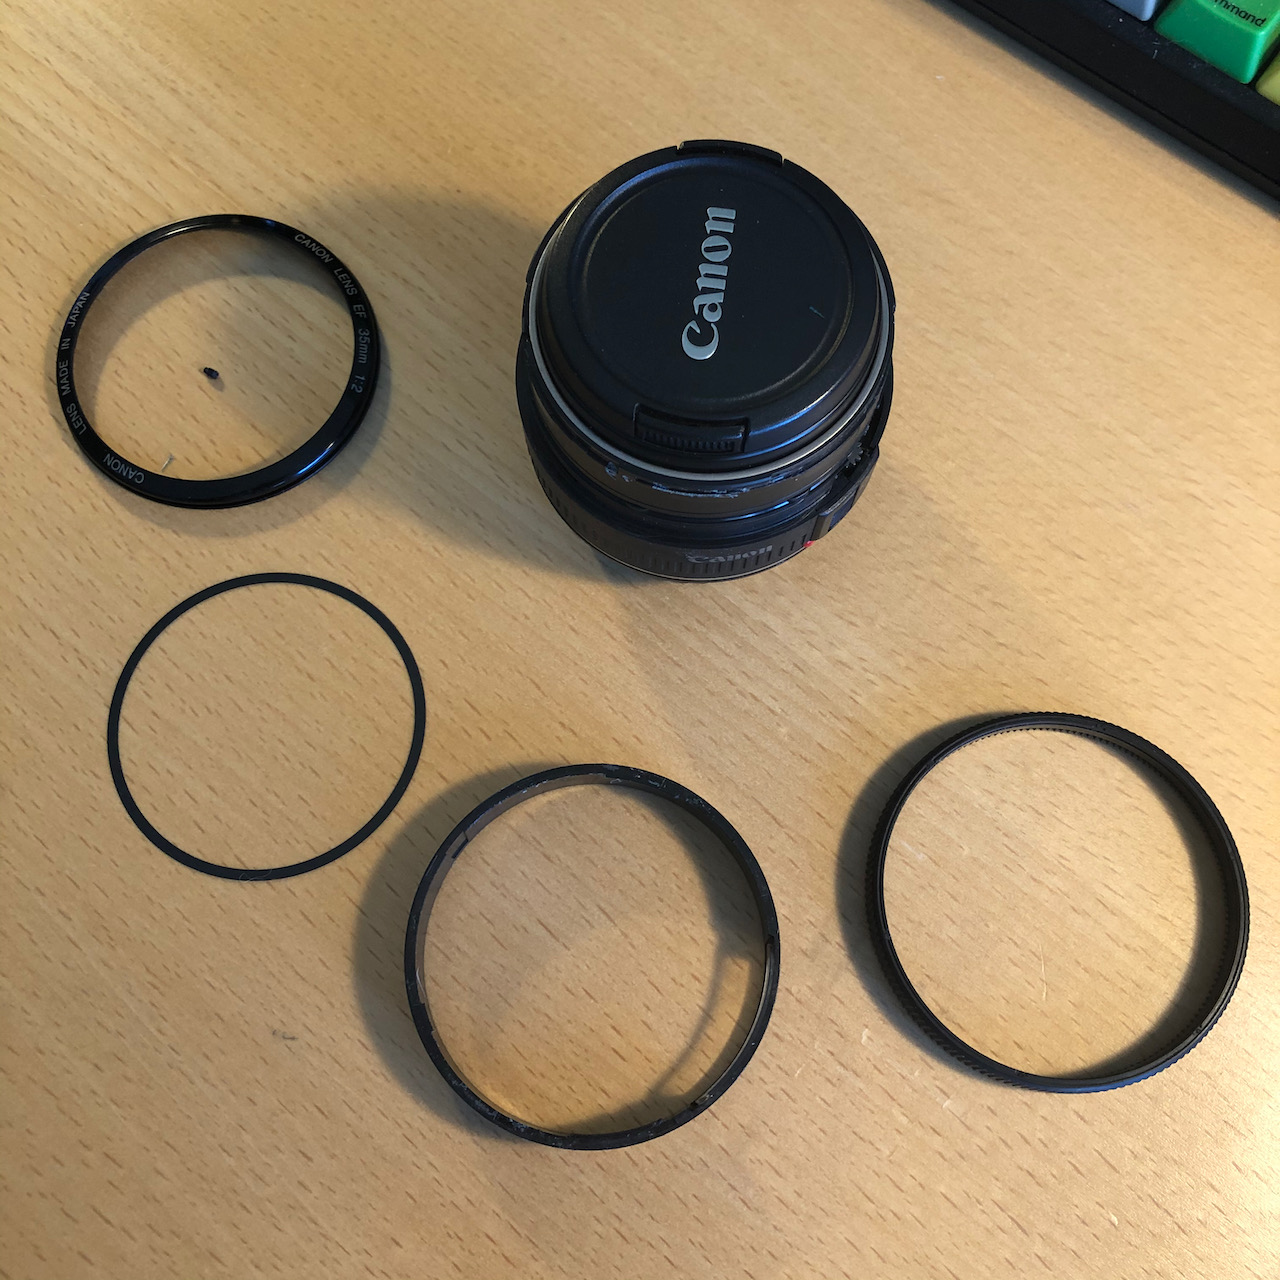 Parts removed to access focus ring, in order.